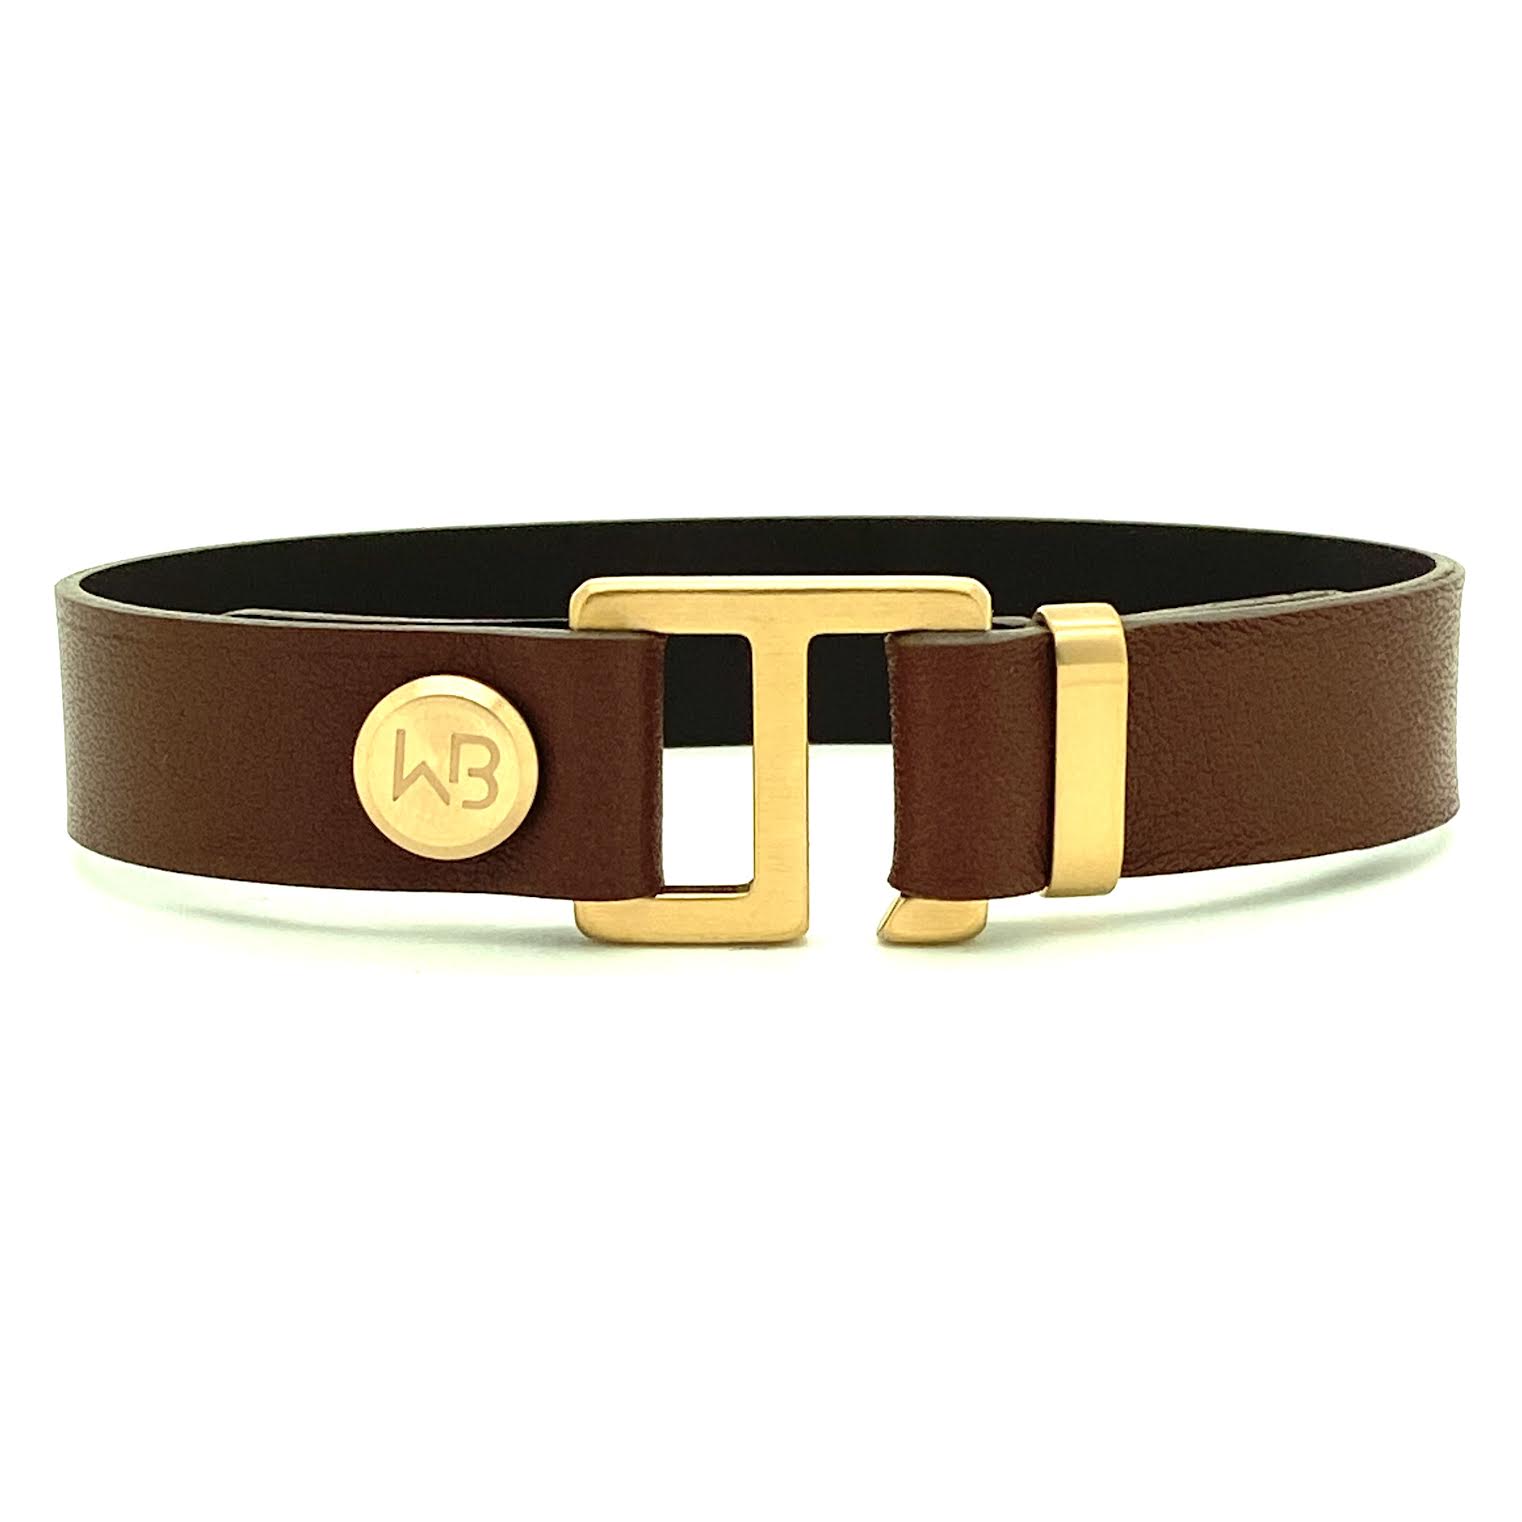 Our striking dark brown Italian leather cuff bracelet is paired perfectly with our artisan designed  hardware. Choice includes brushed rose gold, yellow gold, stainless steel or black ceramic. This adjustable size bracelet is a distinctive piece worn alone or with a WristBend stacking bracelet. Made by WristBend